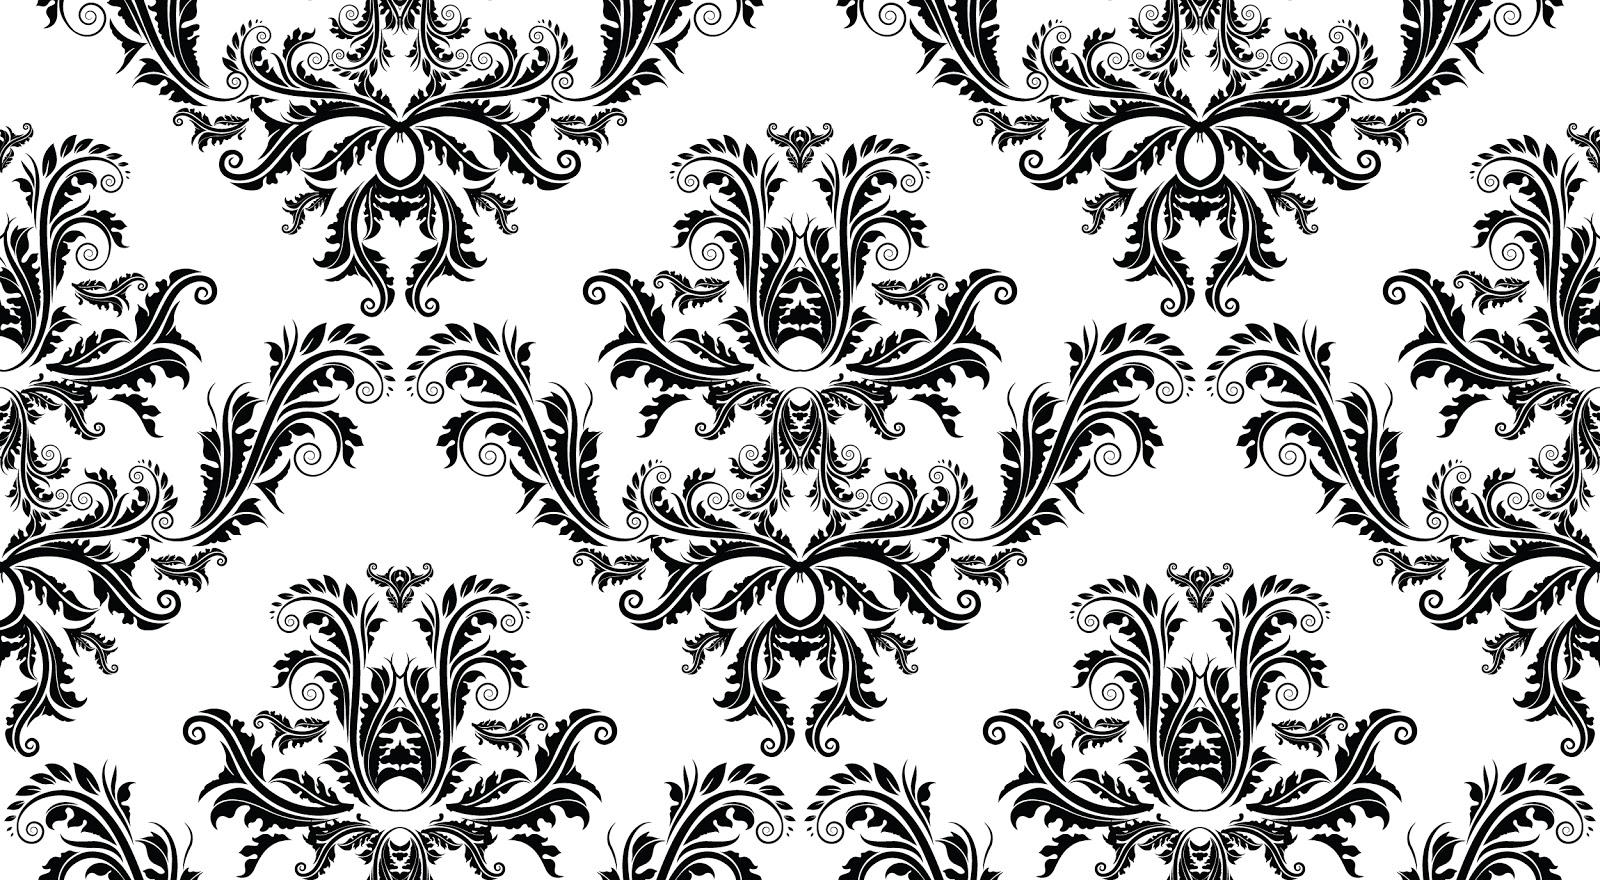 Download Free vector patterns and backgrounds